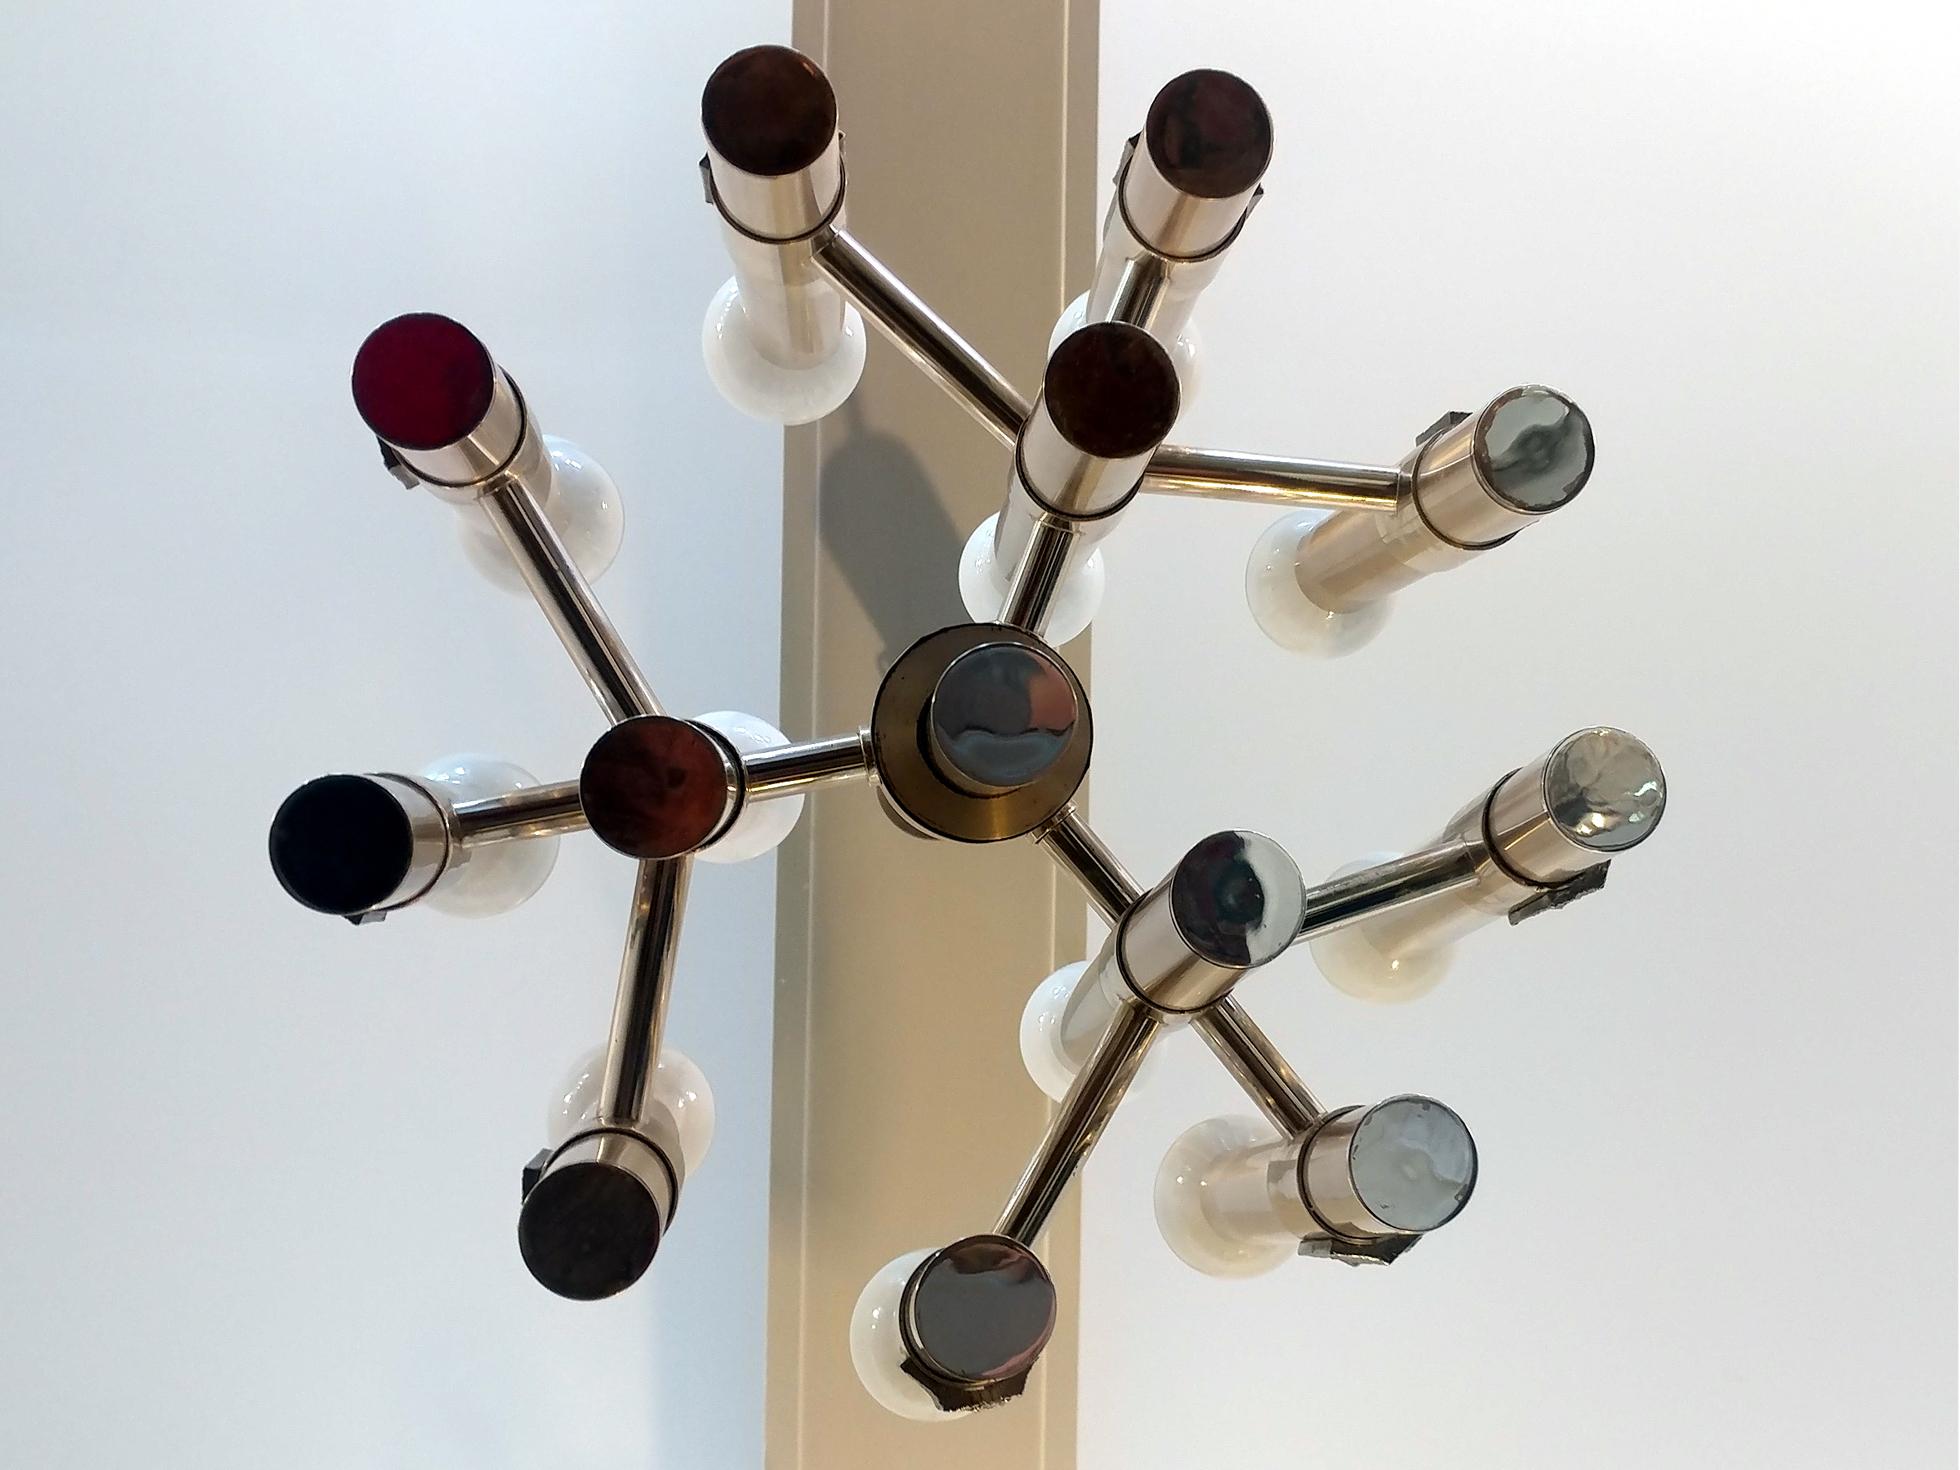 Twelve-light chandelier by Italian modernist Gaetano Sciolari, the fixture has a nice Brutalist detail, similar to the works of Paul Evans or Adrian Pearsall in that same era. All original and in good cosmetic condition appropriate to age and use.